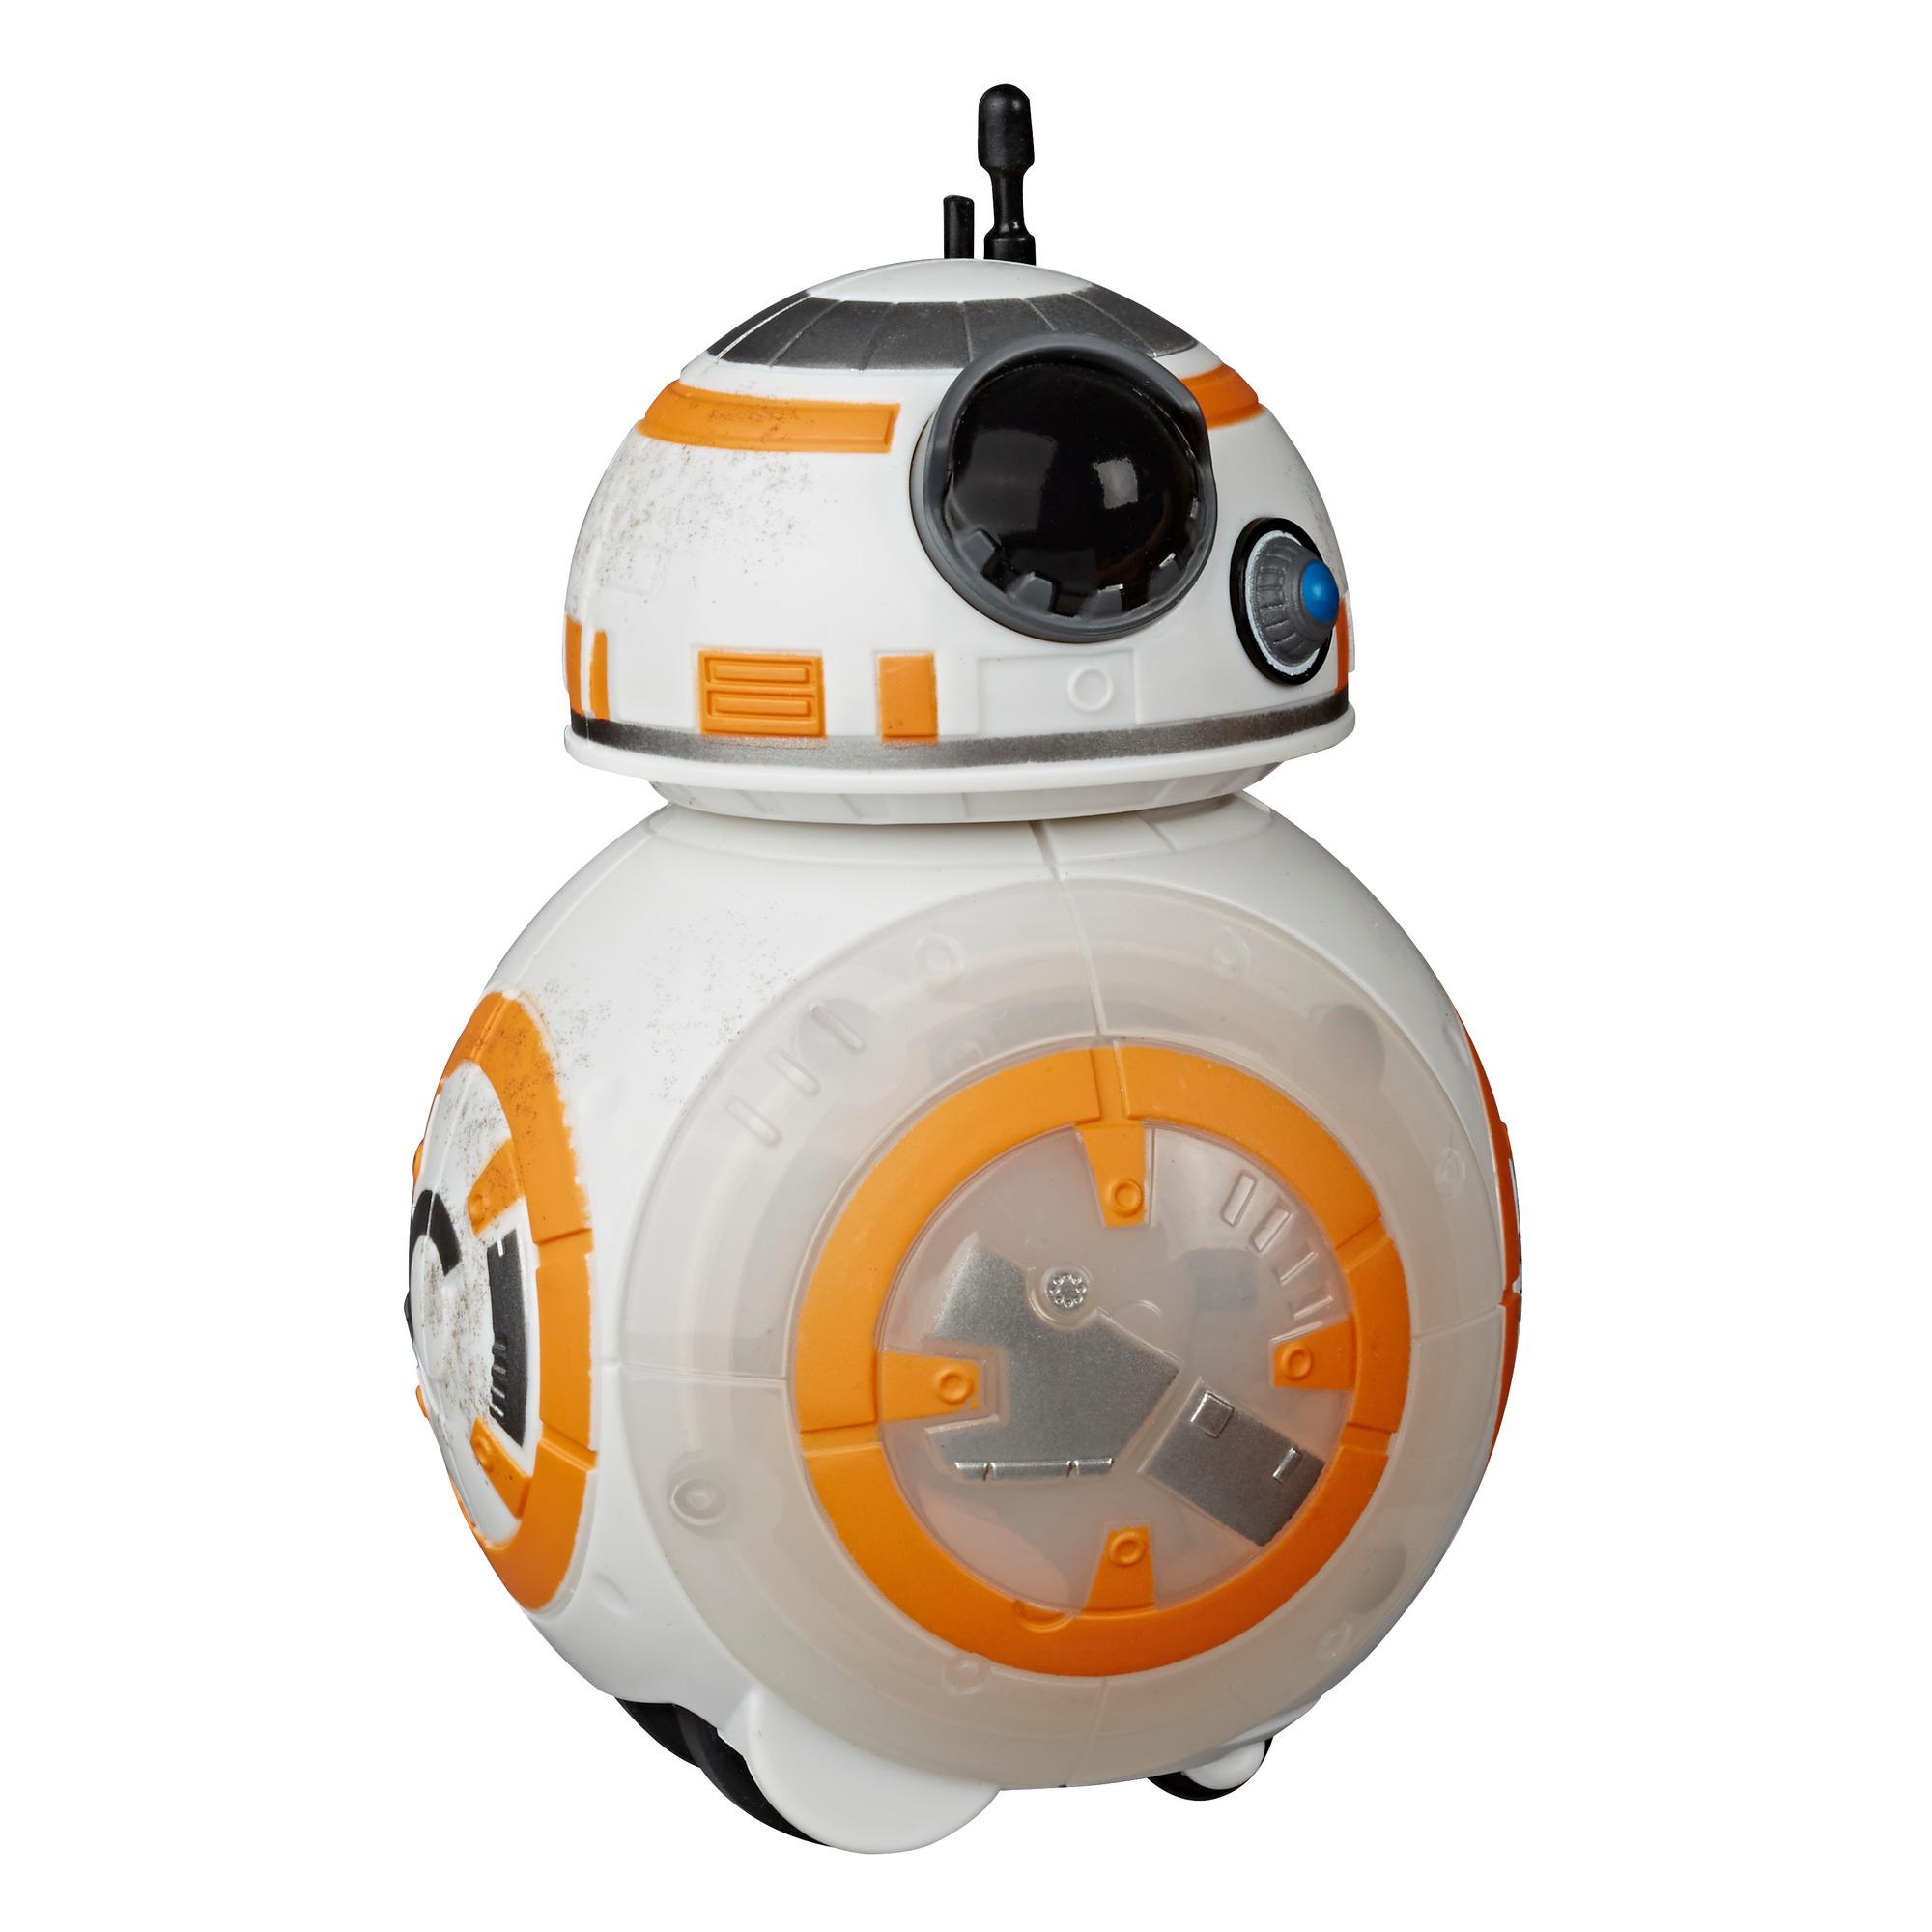 Star Wars Spark and Go BB-8 Rolling Astromech Droid Rev-and-Go Toy